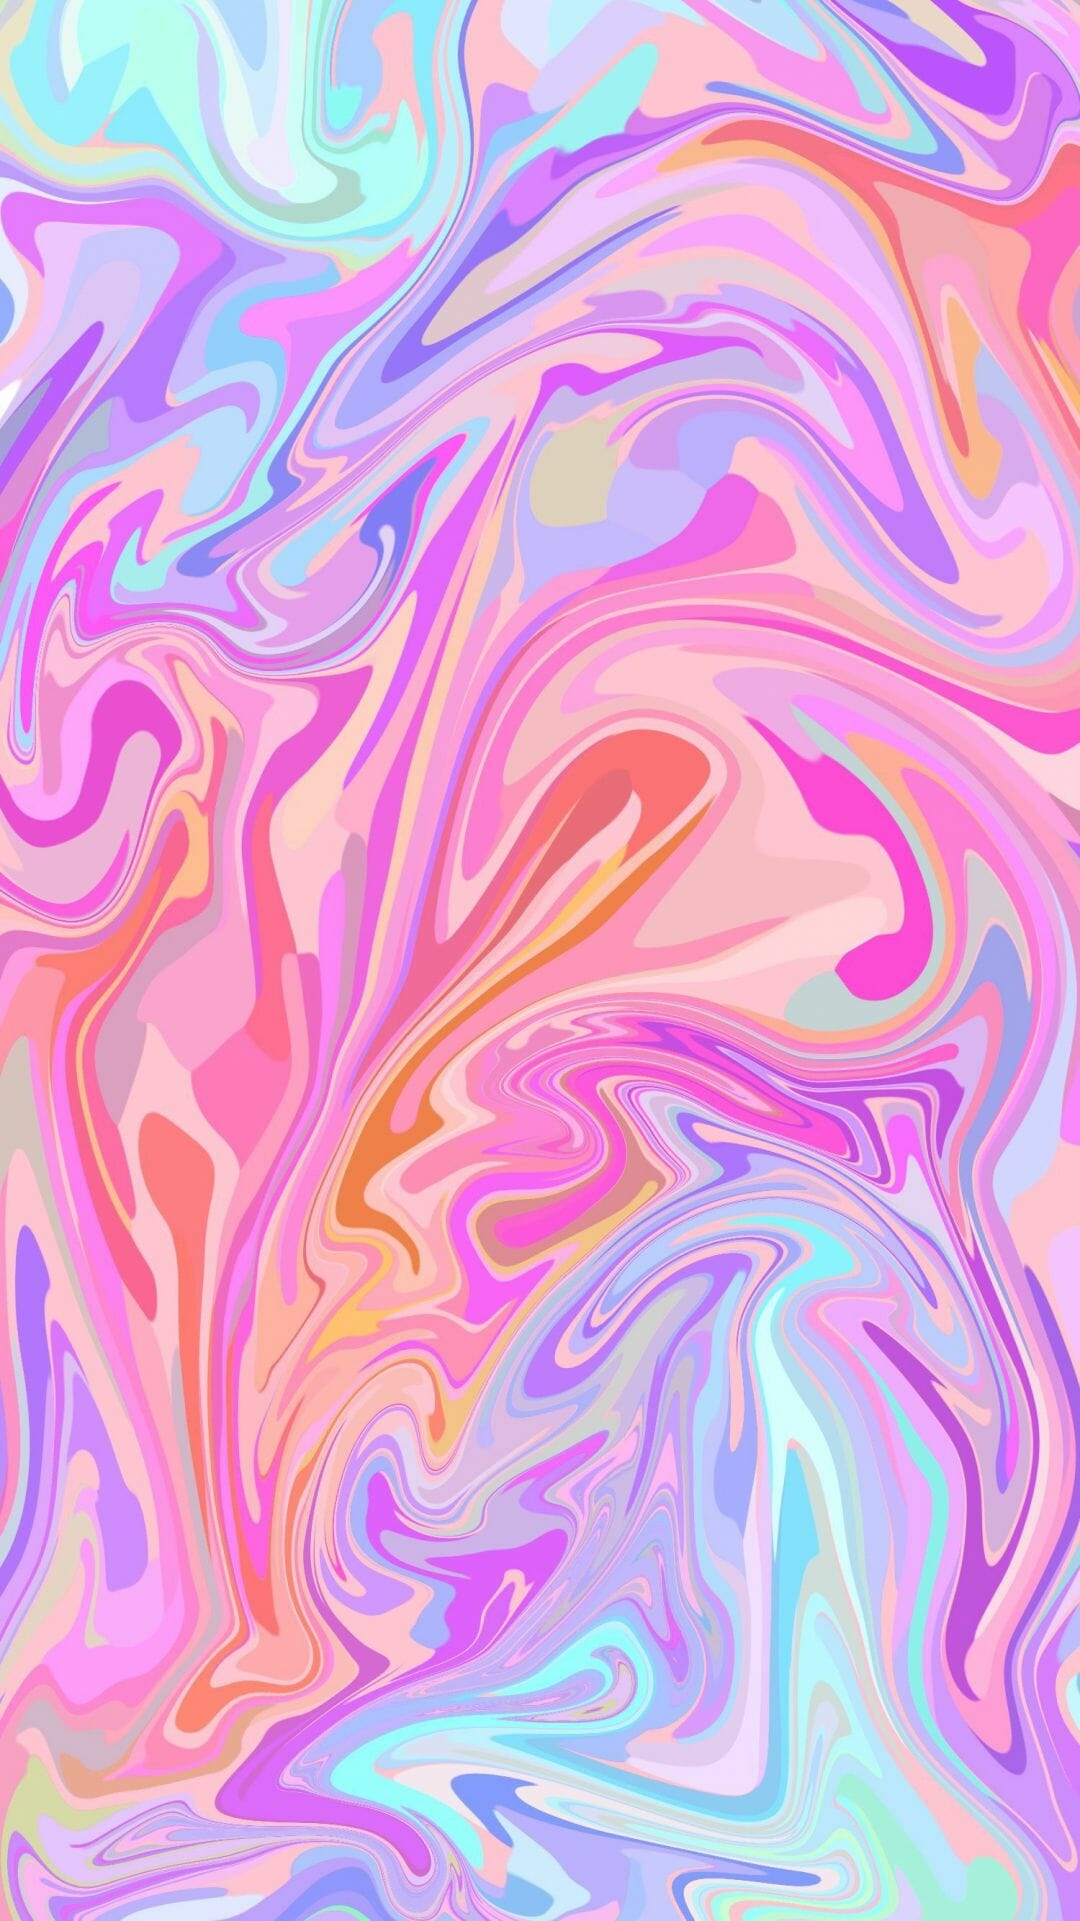 A colorful abstract pattern with pink, purple and blue - Abstract